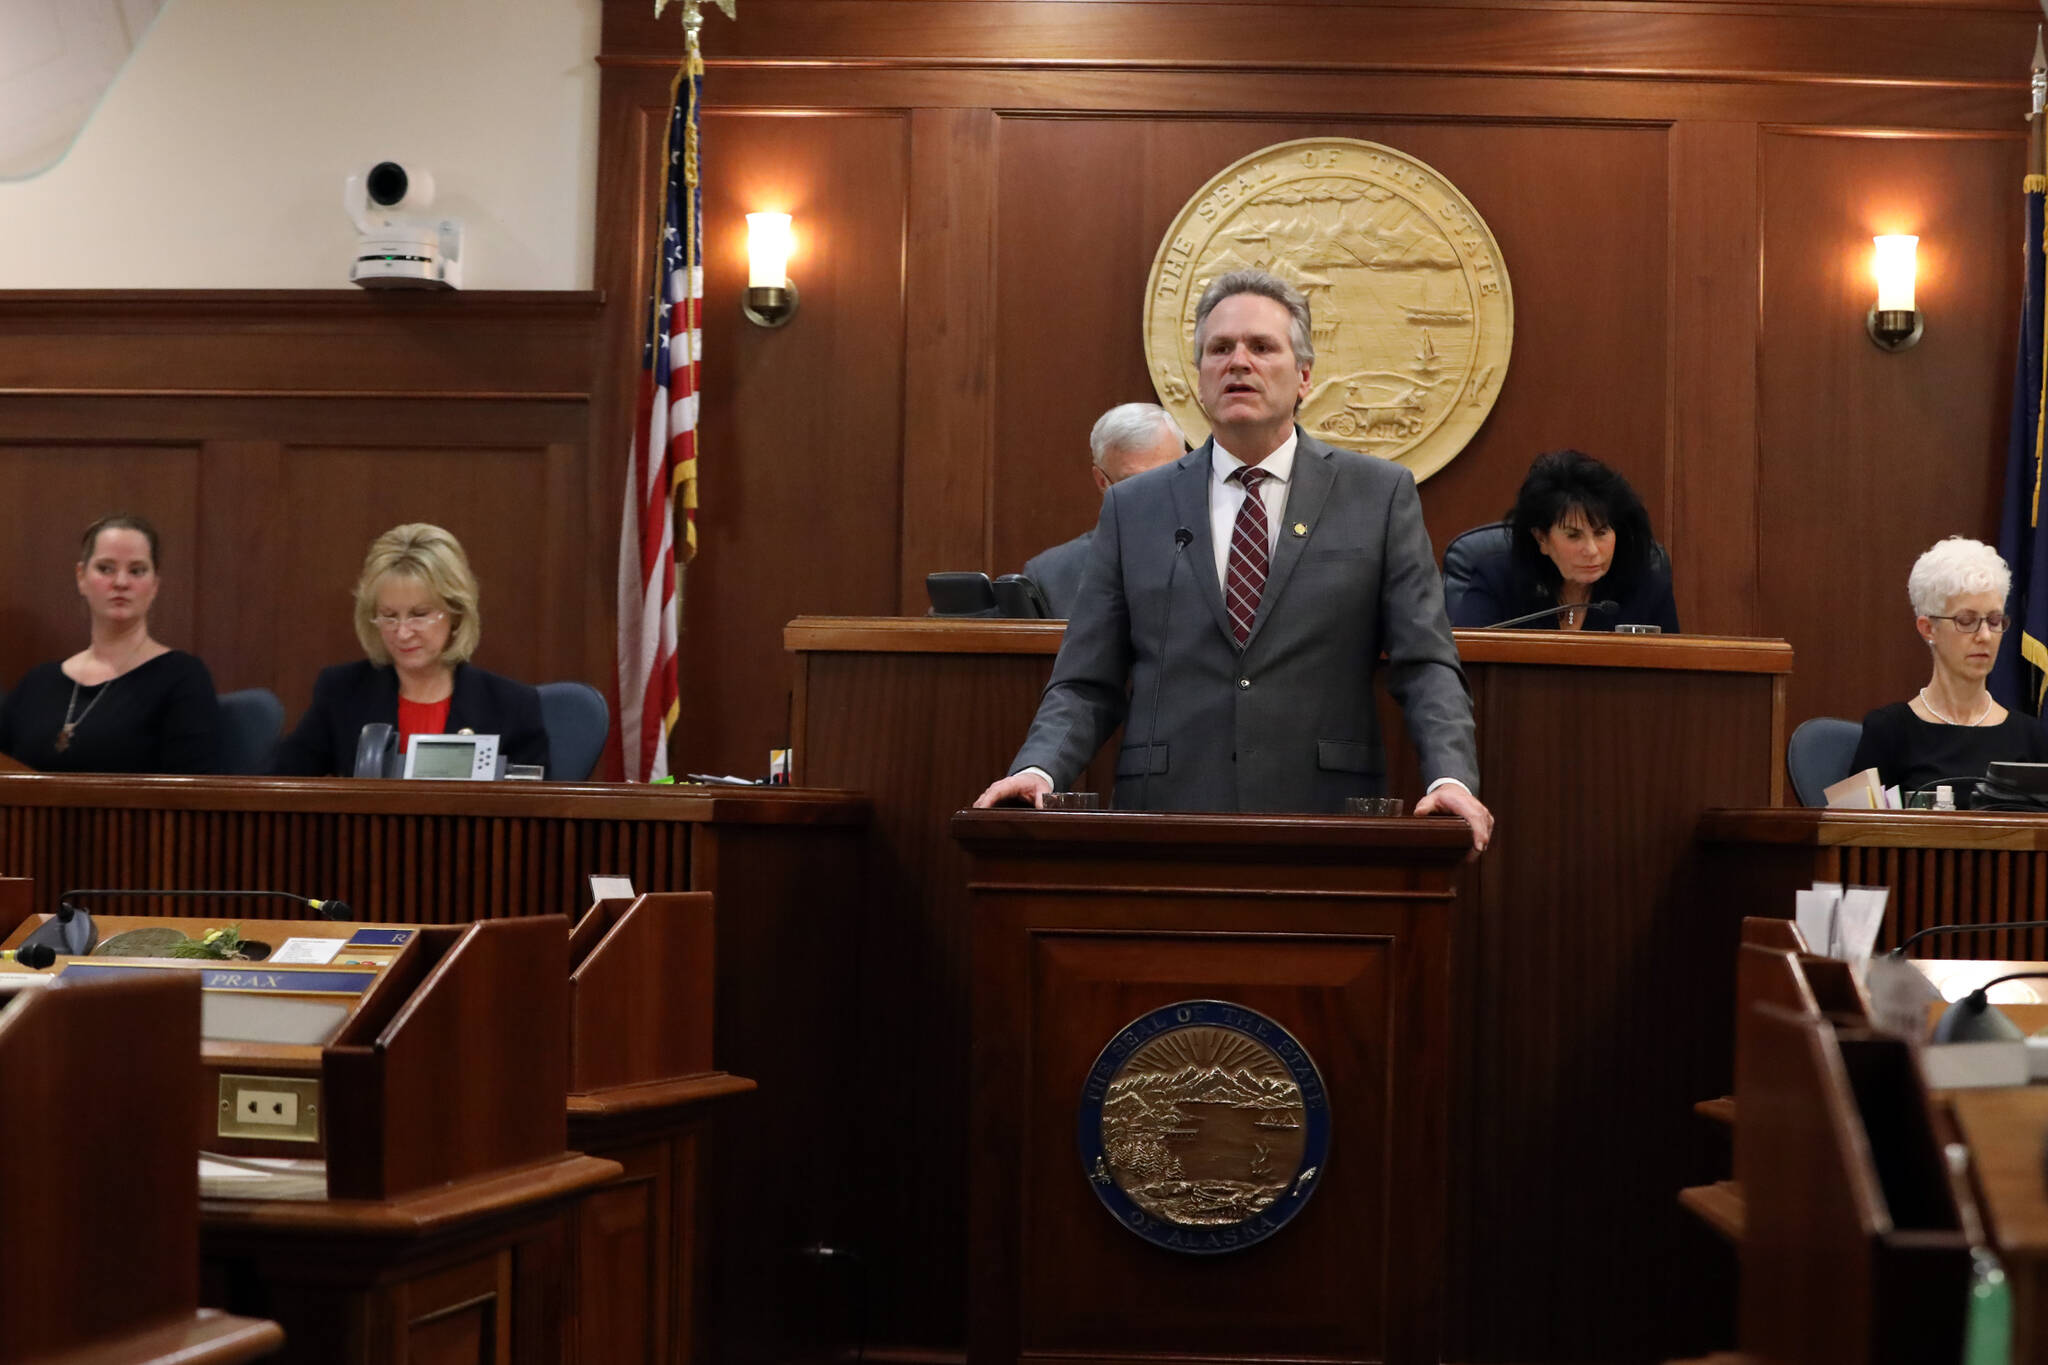 Gov. Mike Dunleavy delivers his State of the State address to a joint session of the Alaska State Legislature on Monday. (Clarise Larson / Juneau Empire)